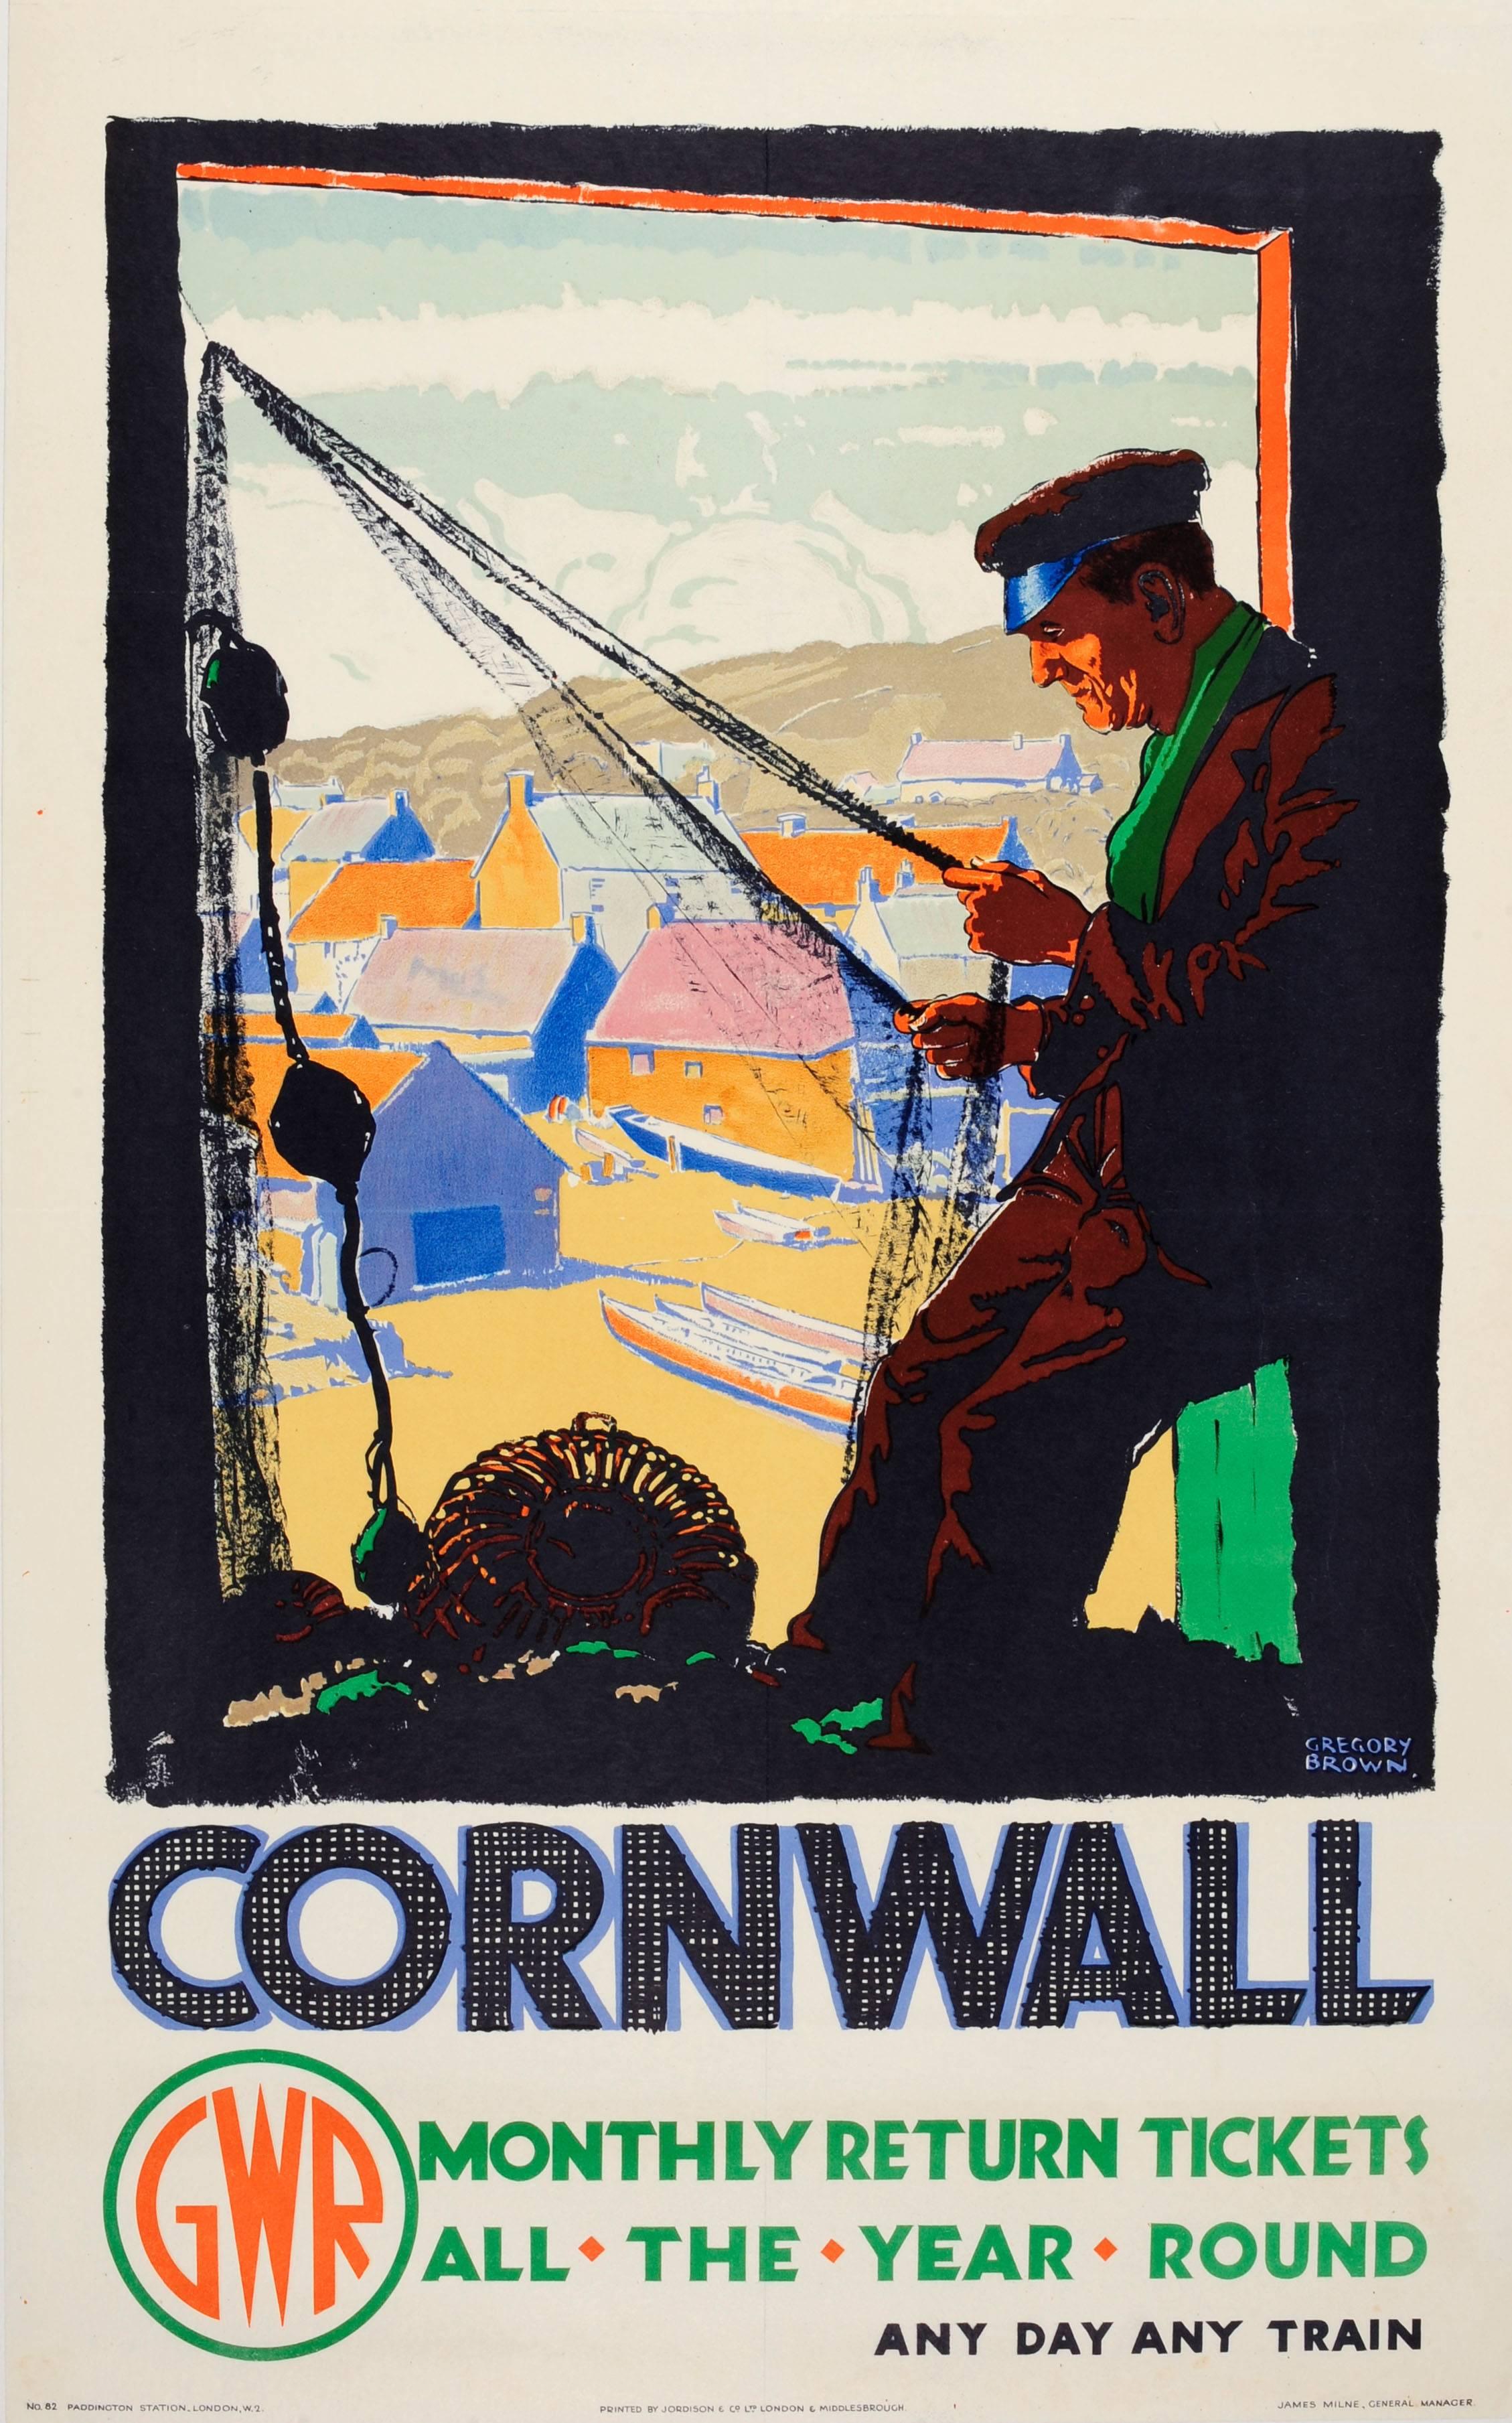 Frederic Gregory Brown Print - Original Vintage GWR Great Western Railway Travel Poster For Cornwall By Train